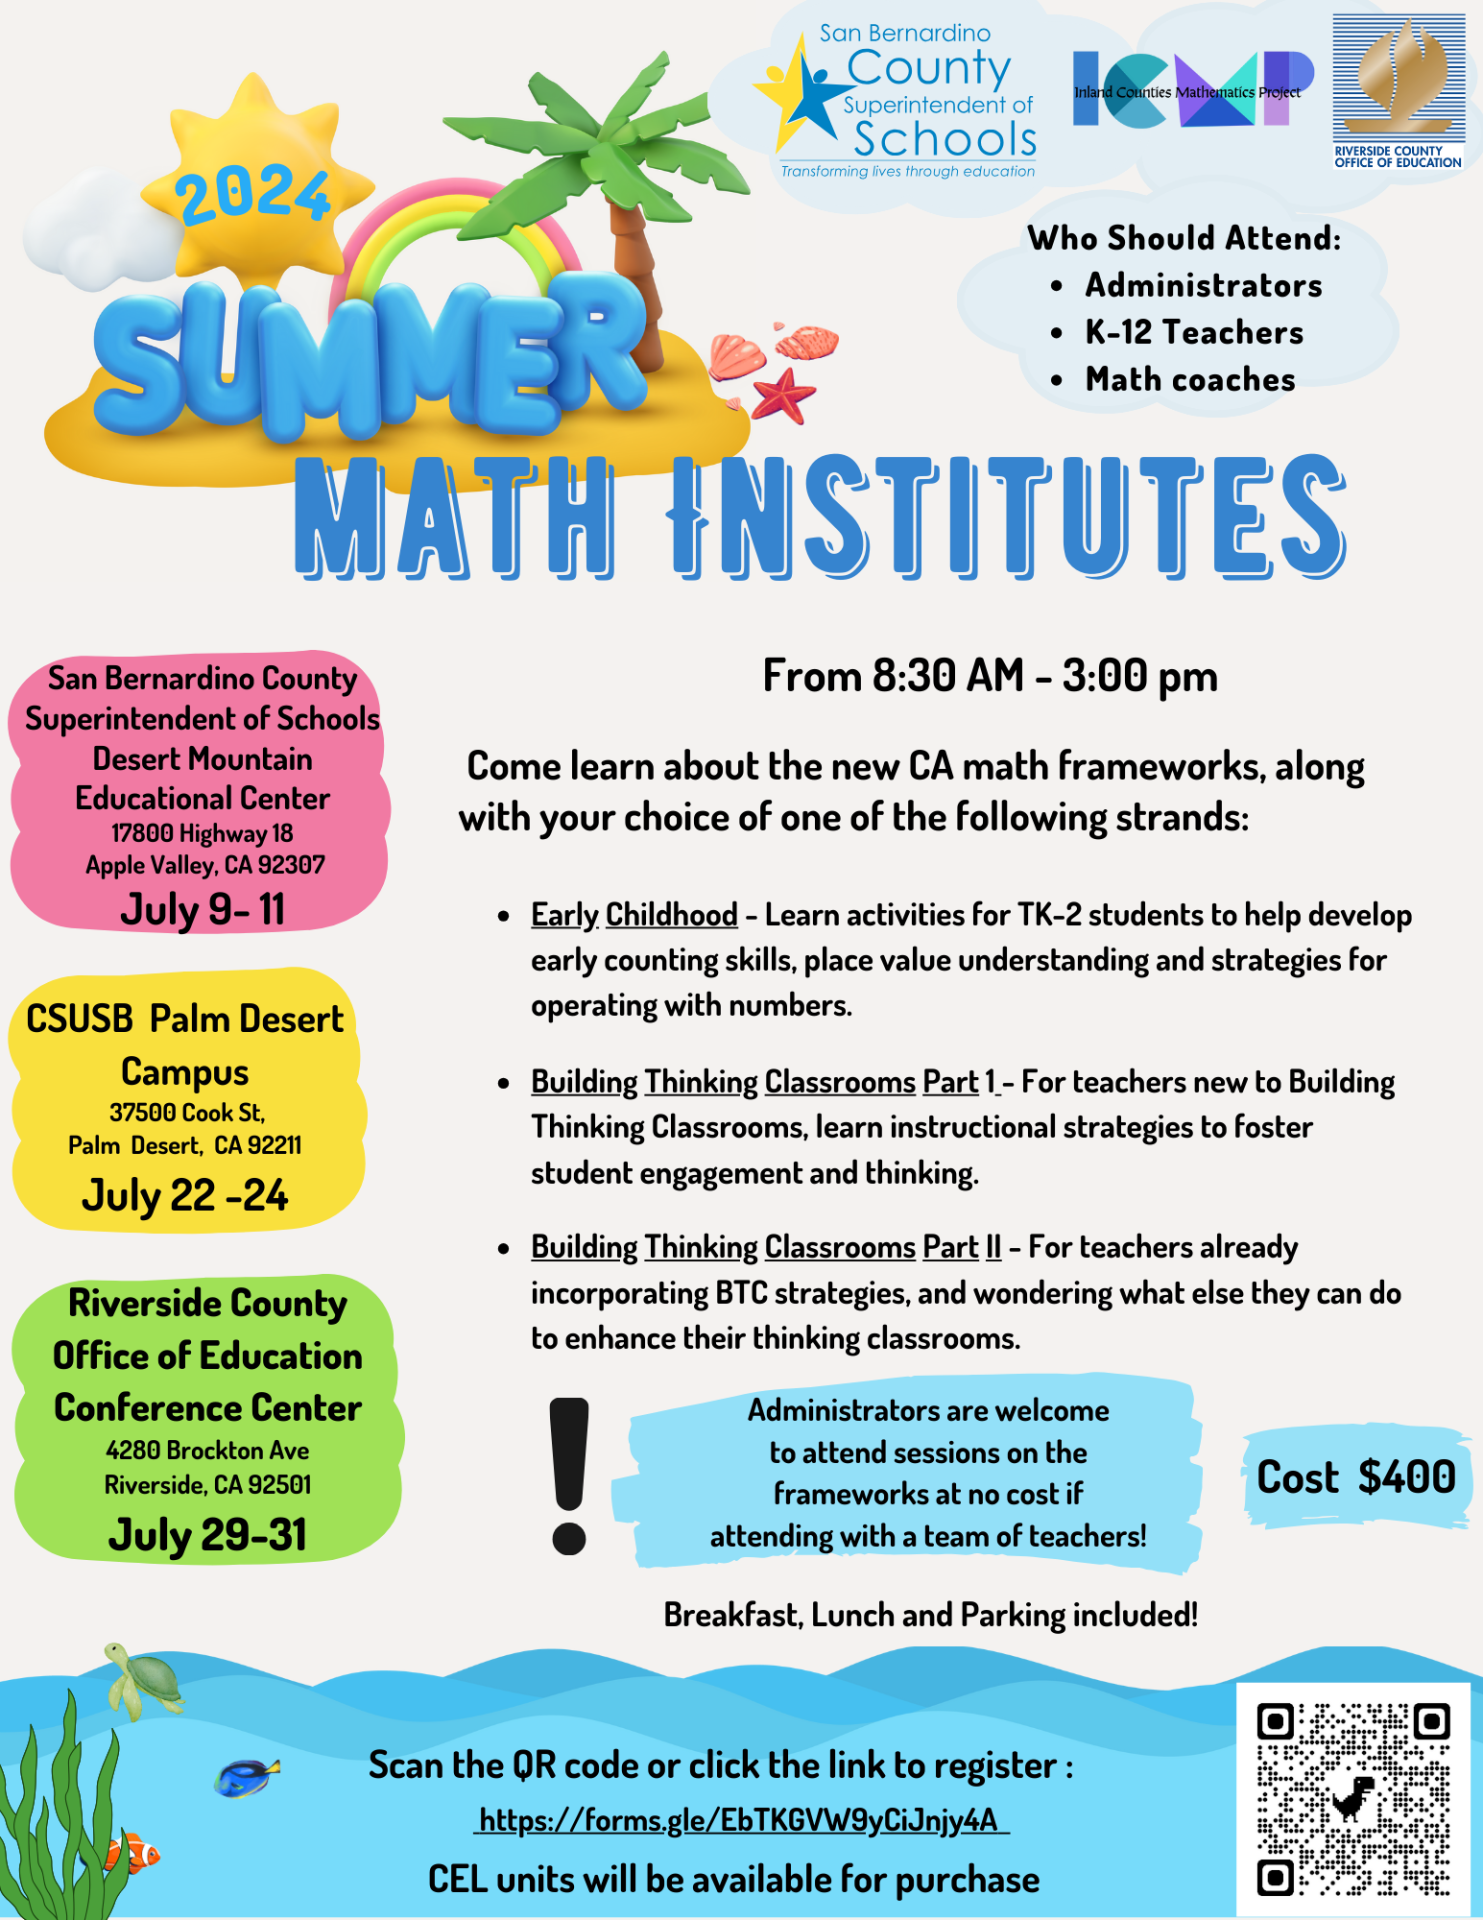 A description of the information for our summer institute.  Each day from 8:30 am to 3:00 pm. Event Description: This institute will explore teaching practices that support the development of student thinking in the math classroom Payment: $400 to cover parking, materials, refreshments, and lunch. Credit: 2 Math Units of College of Extended Global Education Credits are available for an additional cost. Registration Link: https://forms.gle/EbTKGVW9yCiJnjy4A